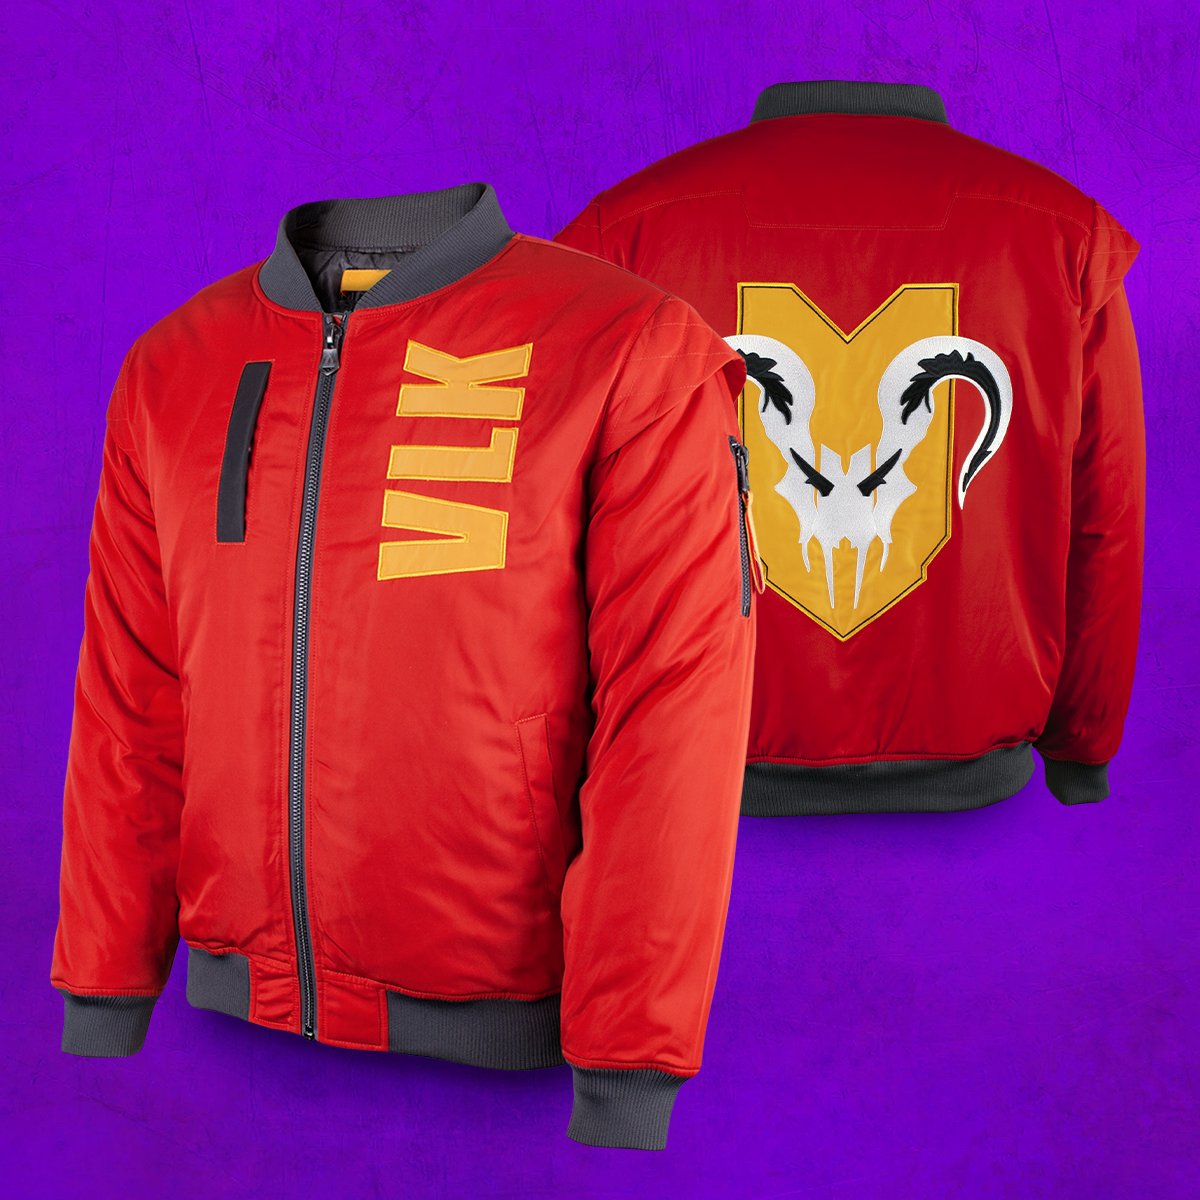 The skies may belong to her, but Valkyrie's jacket can belong to you! Pre-order yours now.

🛍️: bit.ly/3aA9QUB